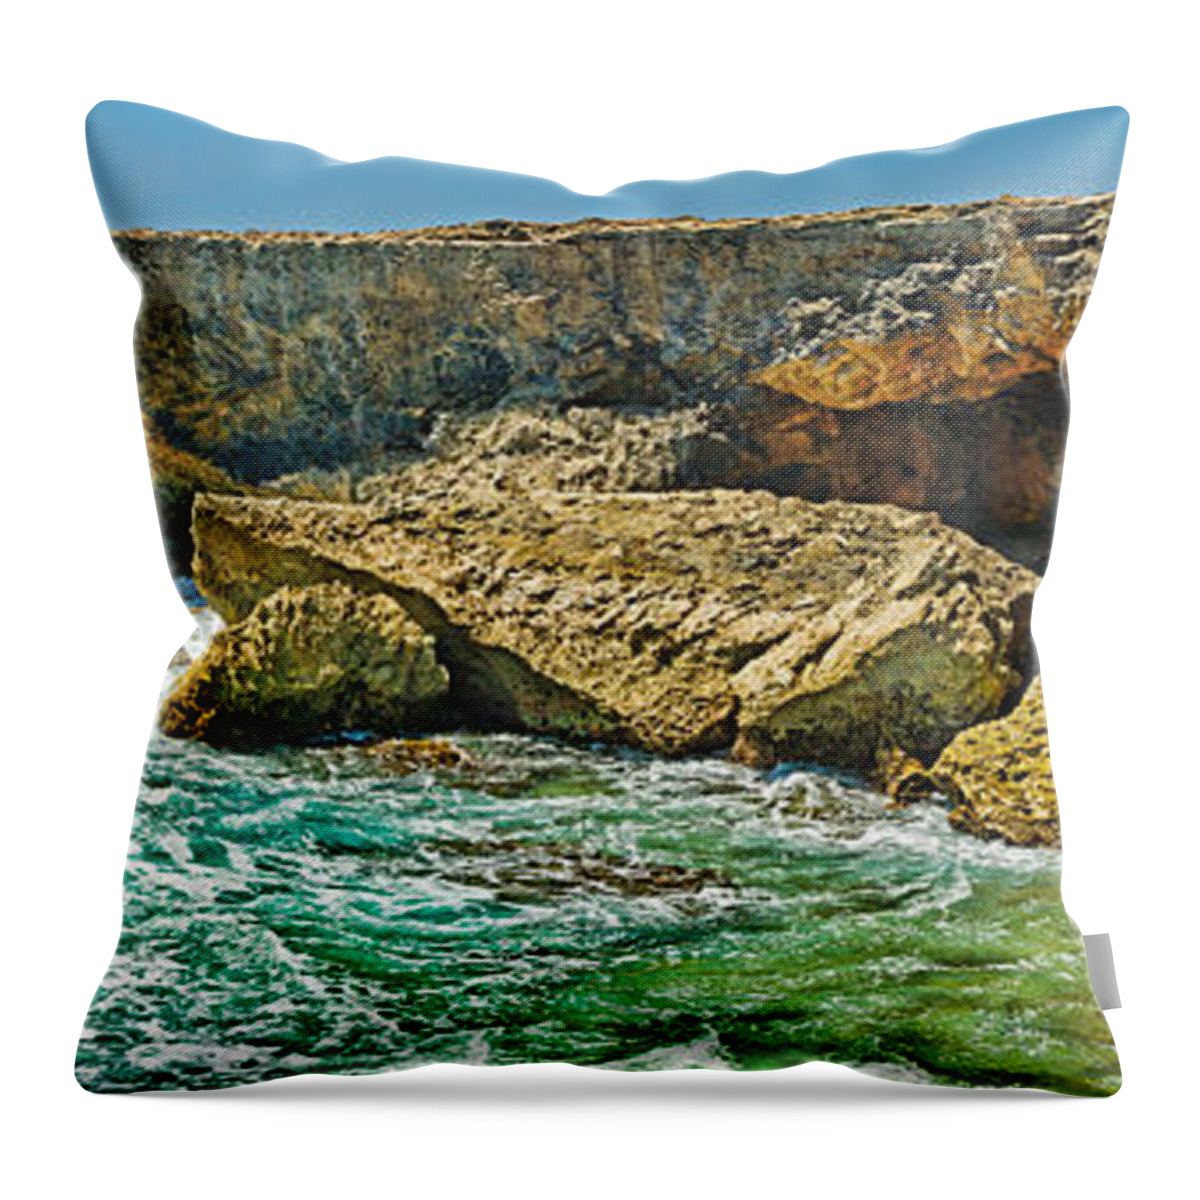 Photography Throw Pillow featuring the photograph Rock Formations At The Coast, Aruba by Panoramic Images